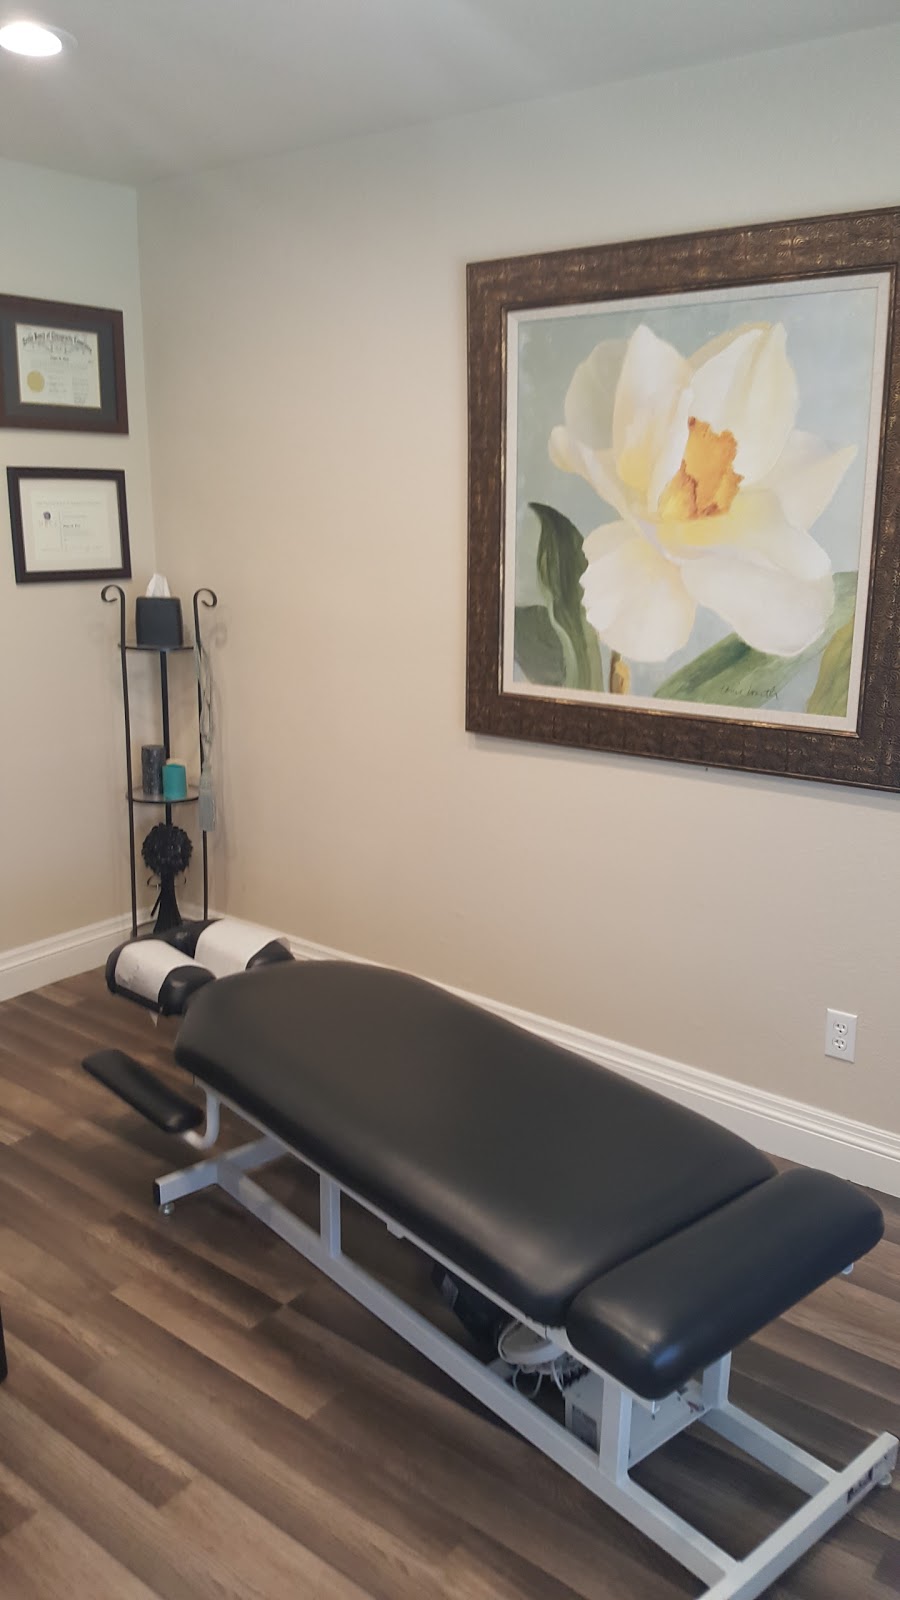 Huttos Affordable Chiropractor, Dr. Poth | 201 Taylor St, Units C & D, Hutto, TX 78634 | Phone: (512) 508-0632